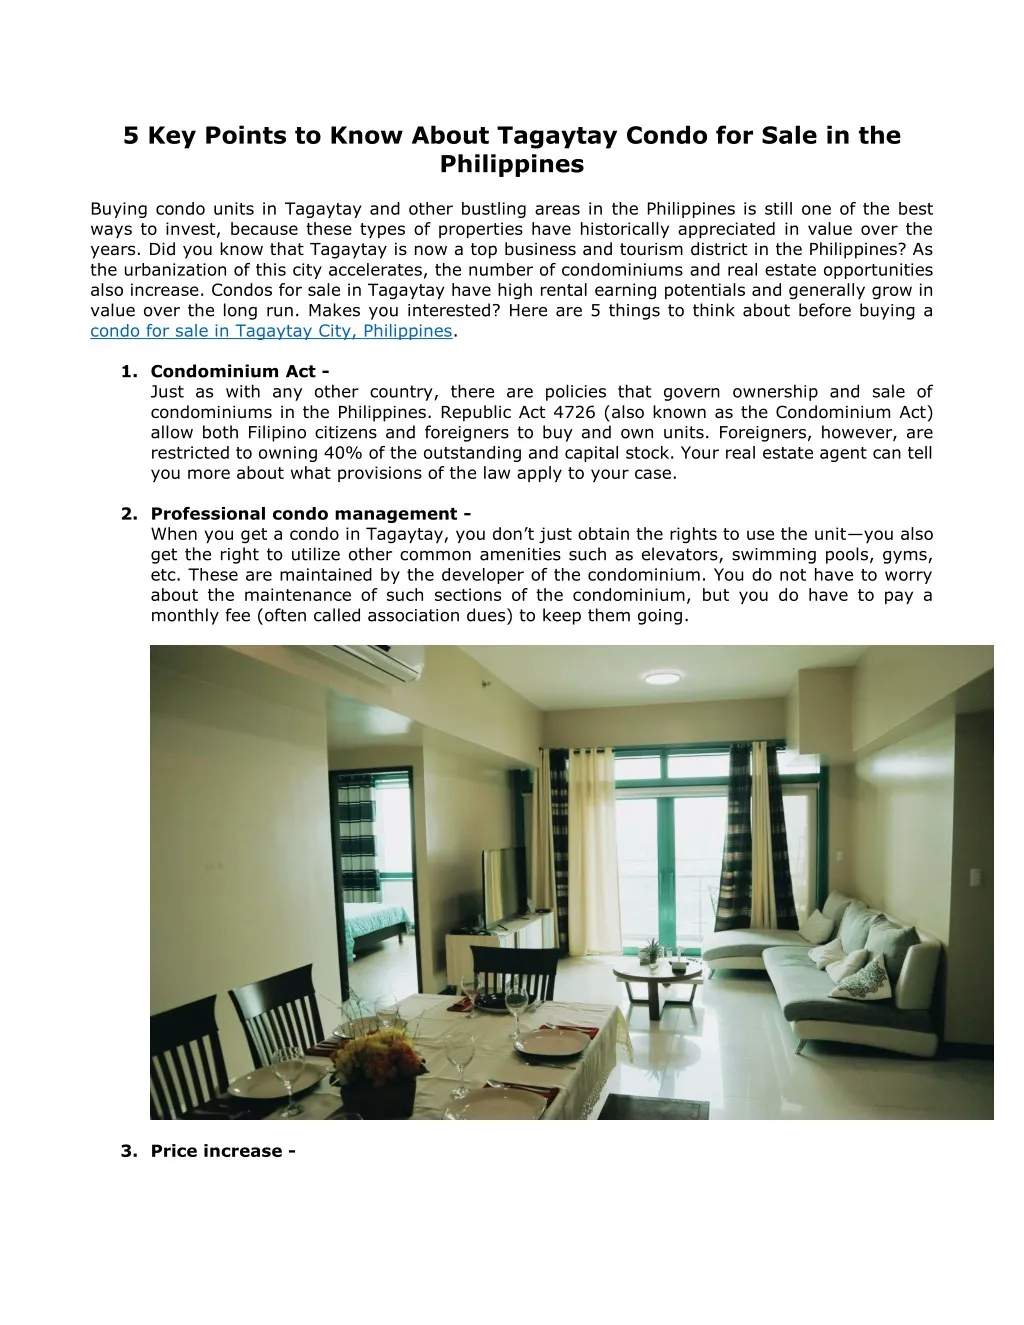 5 key points to know about tagaytay condo